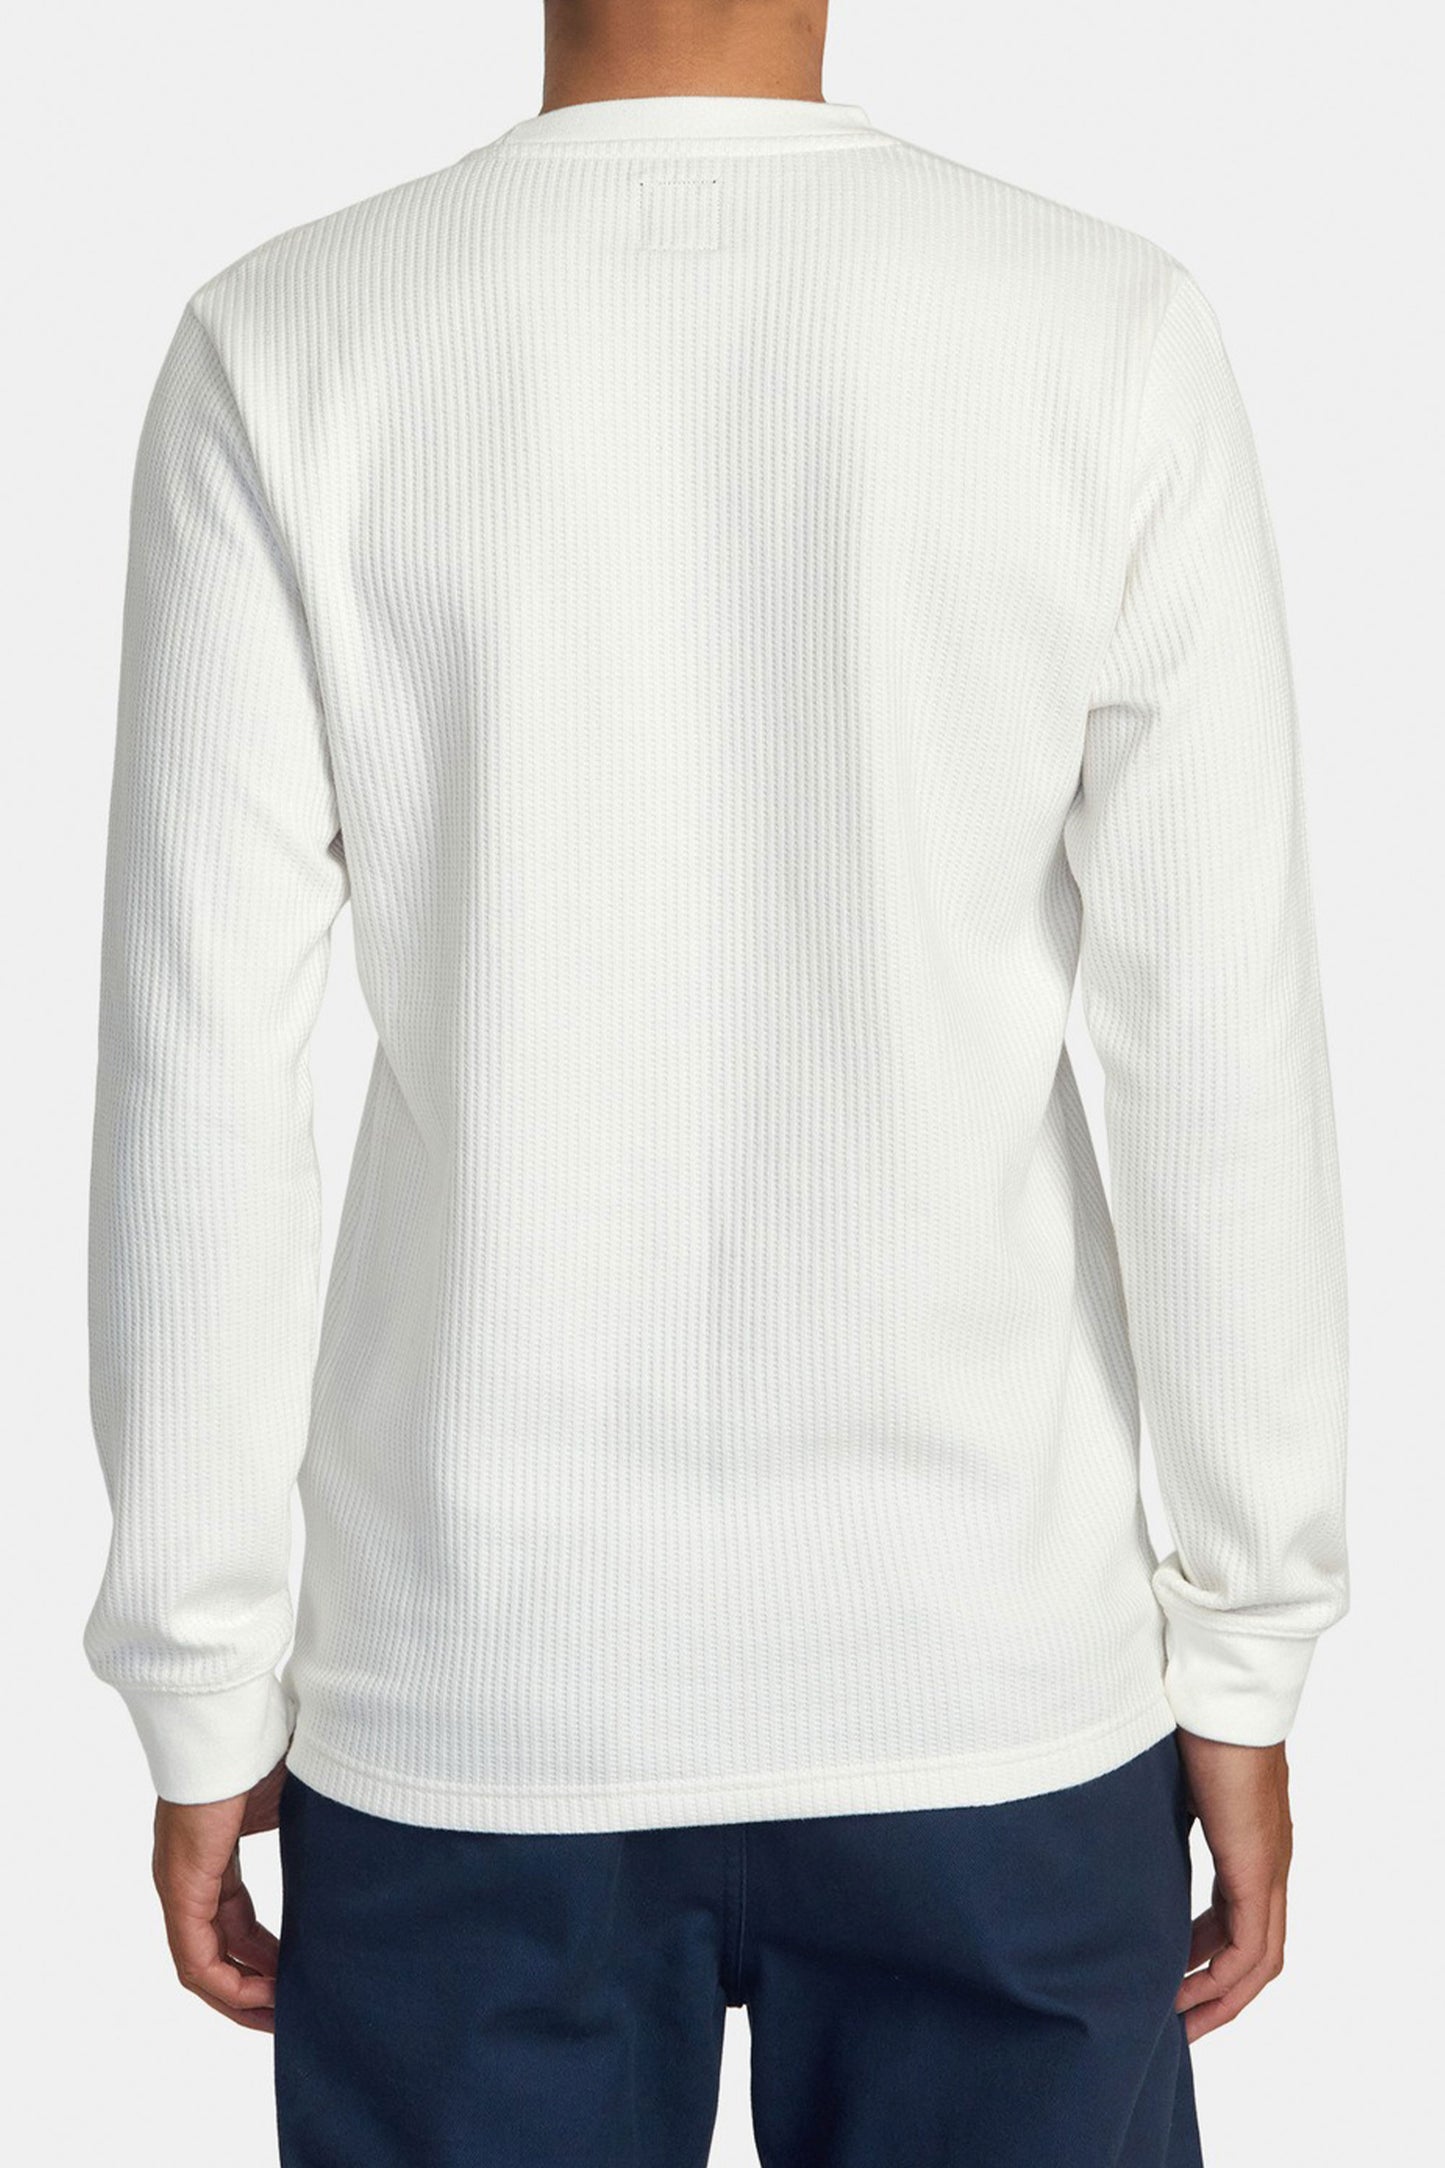    Pukas-Surf-Shop-RVCA-Sweater-Day-Shift-Thermal-Off-White